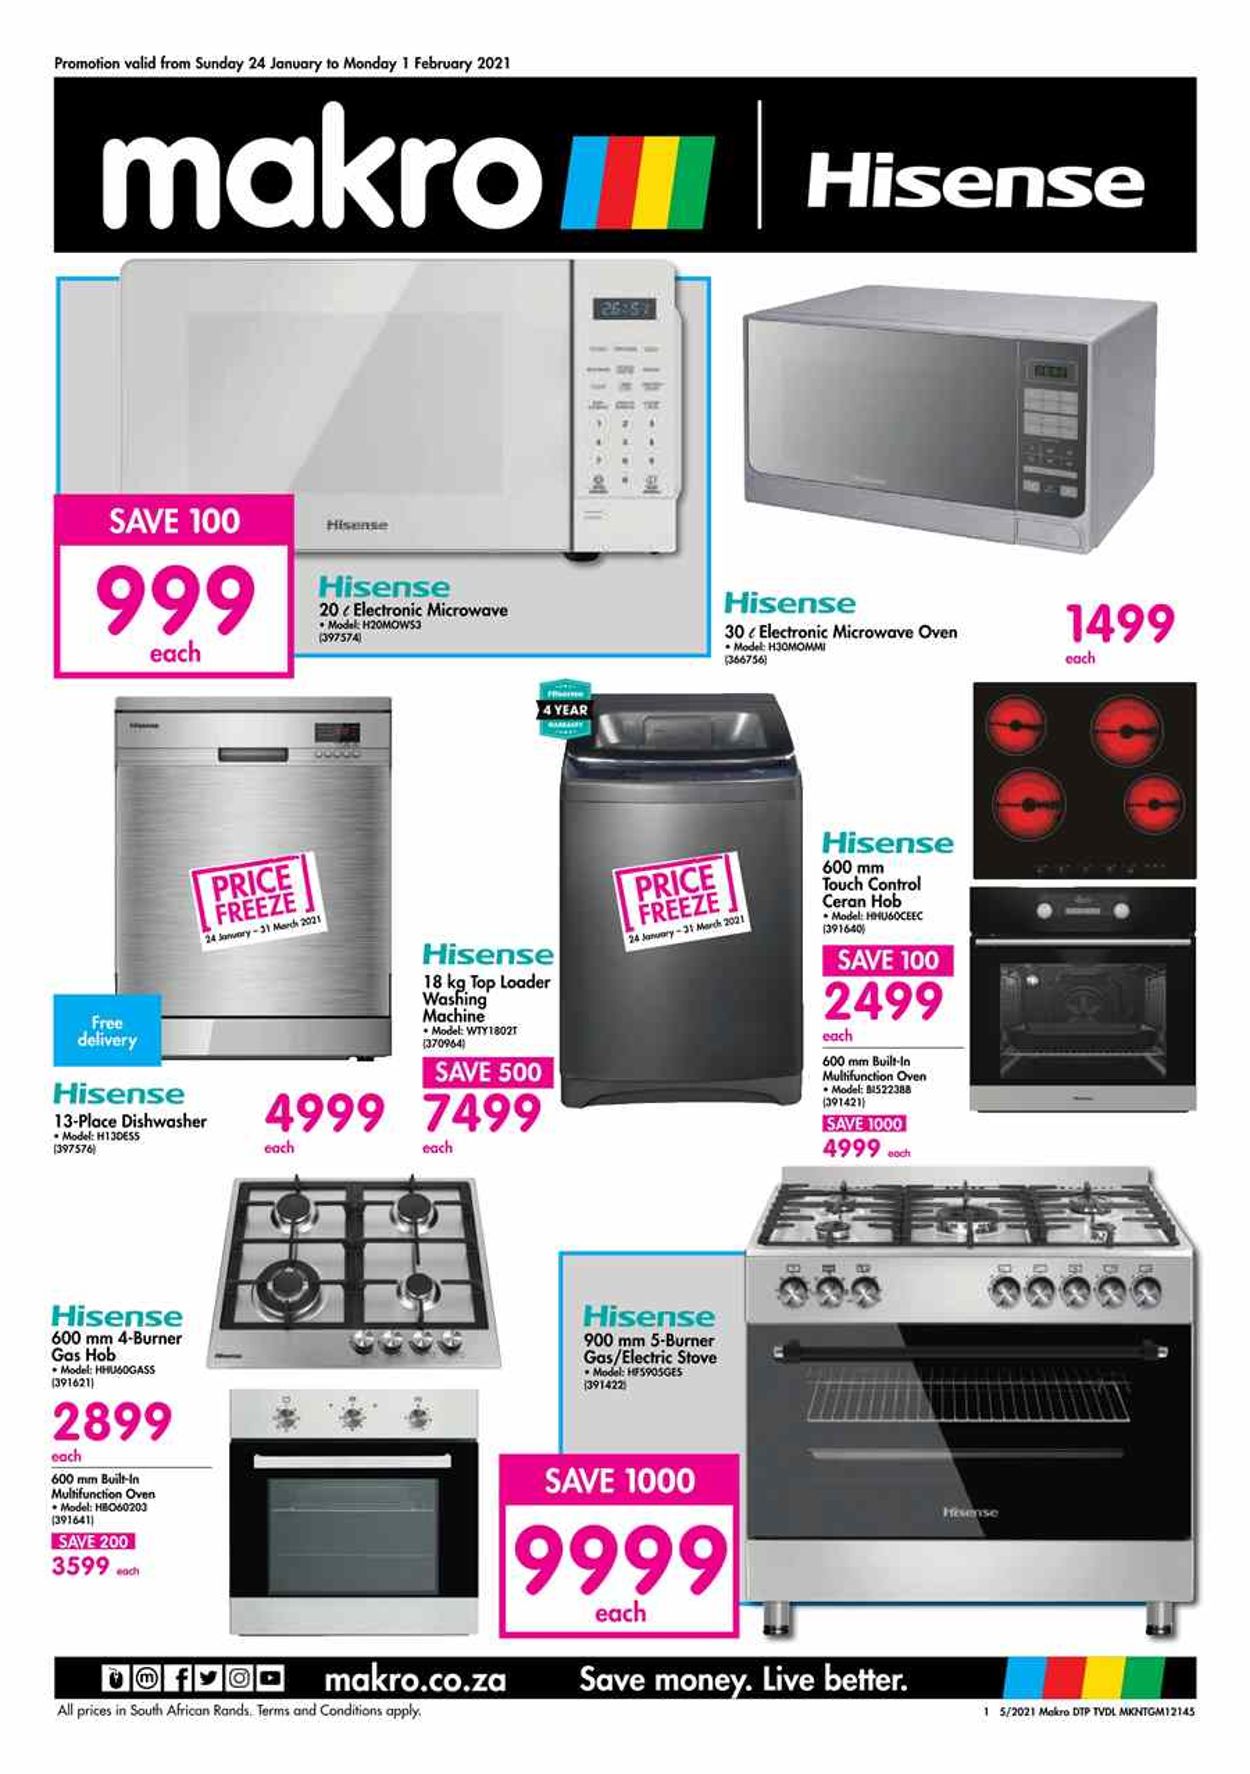 Makro Home Appliance 2021 Current catalogue 2021/01/24 2021/02/01